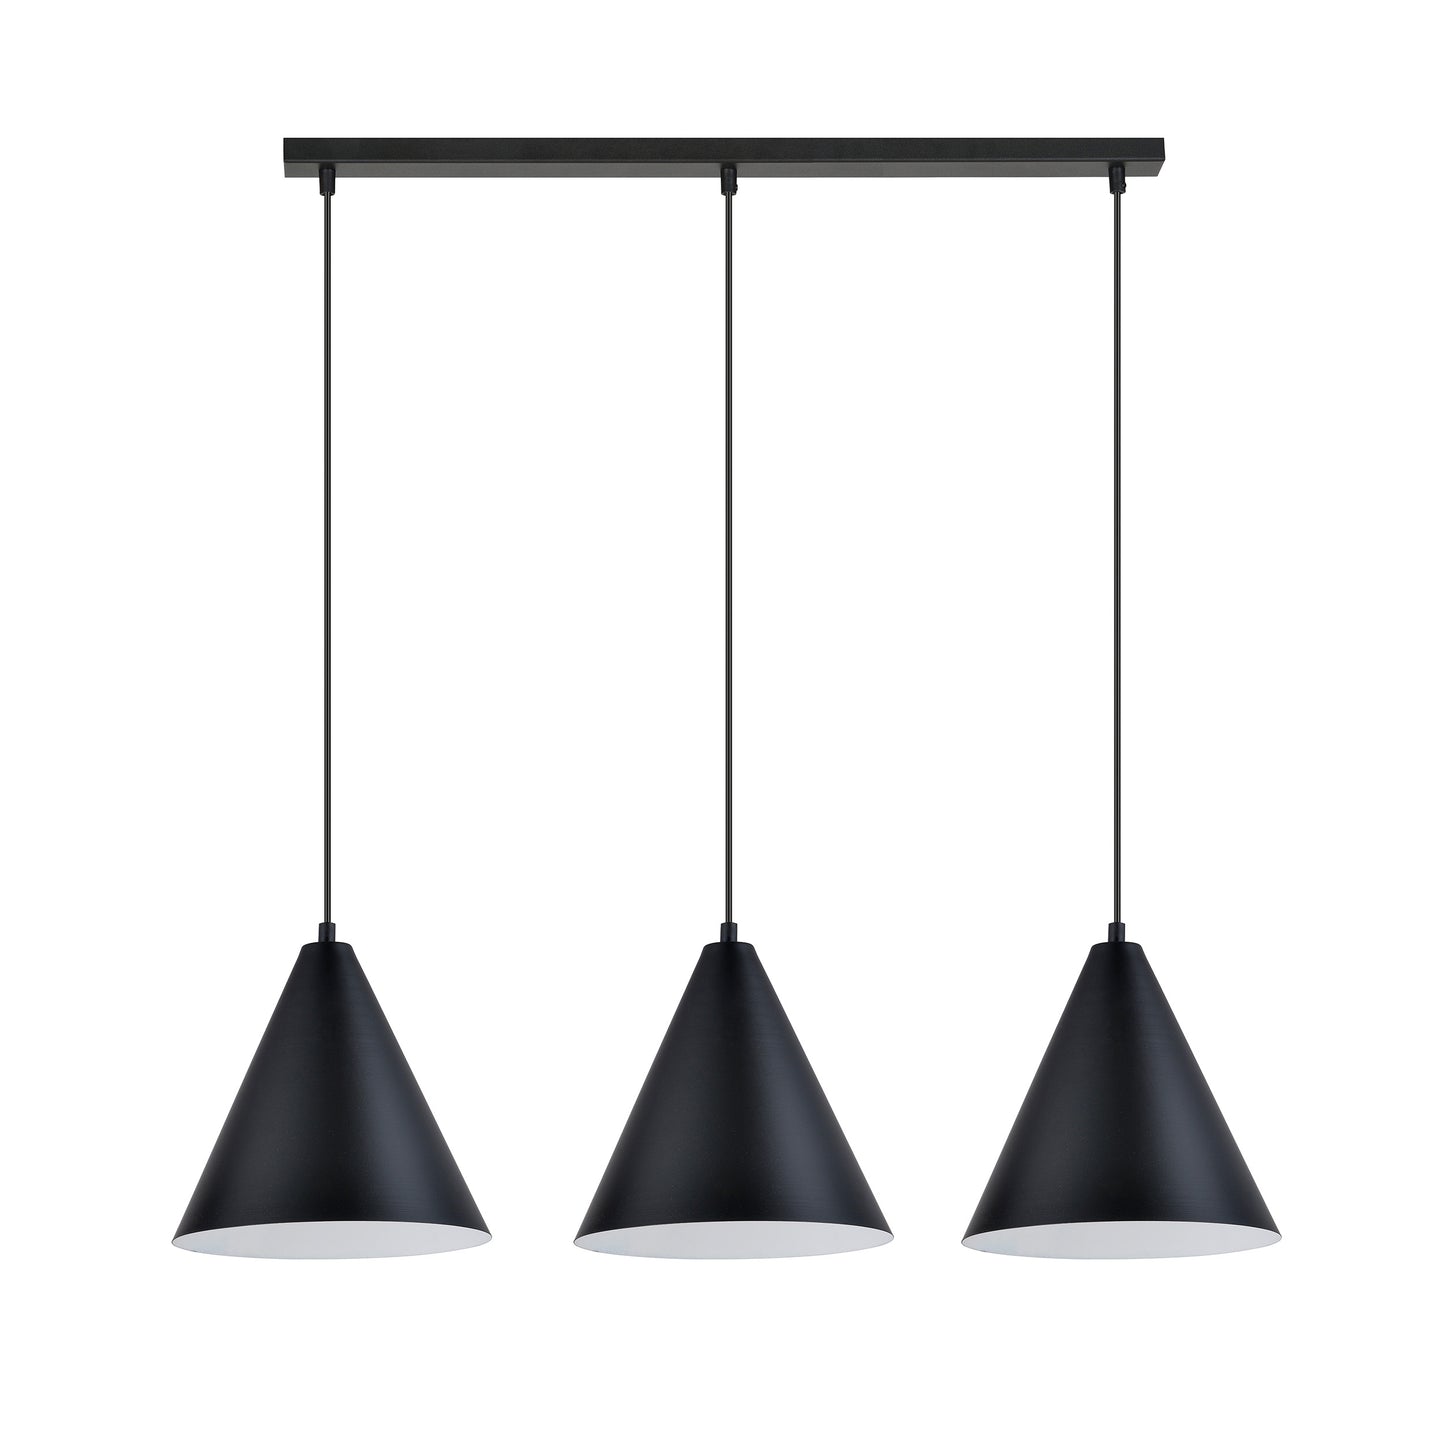 Accentuate your interior with a unique industrial style with a hanging lamp from the REBEL series. Made of durable steel, the lamp is characterized by a minimalist form. The black conical lampshade with a white interior not only adds character, but also optimizes light dispersion, providing pleasant, warm lighting. The perfect complement to modern spaces with a raw character.